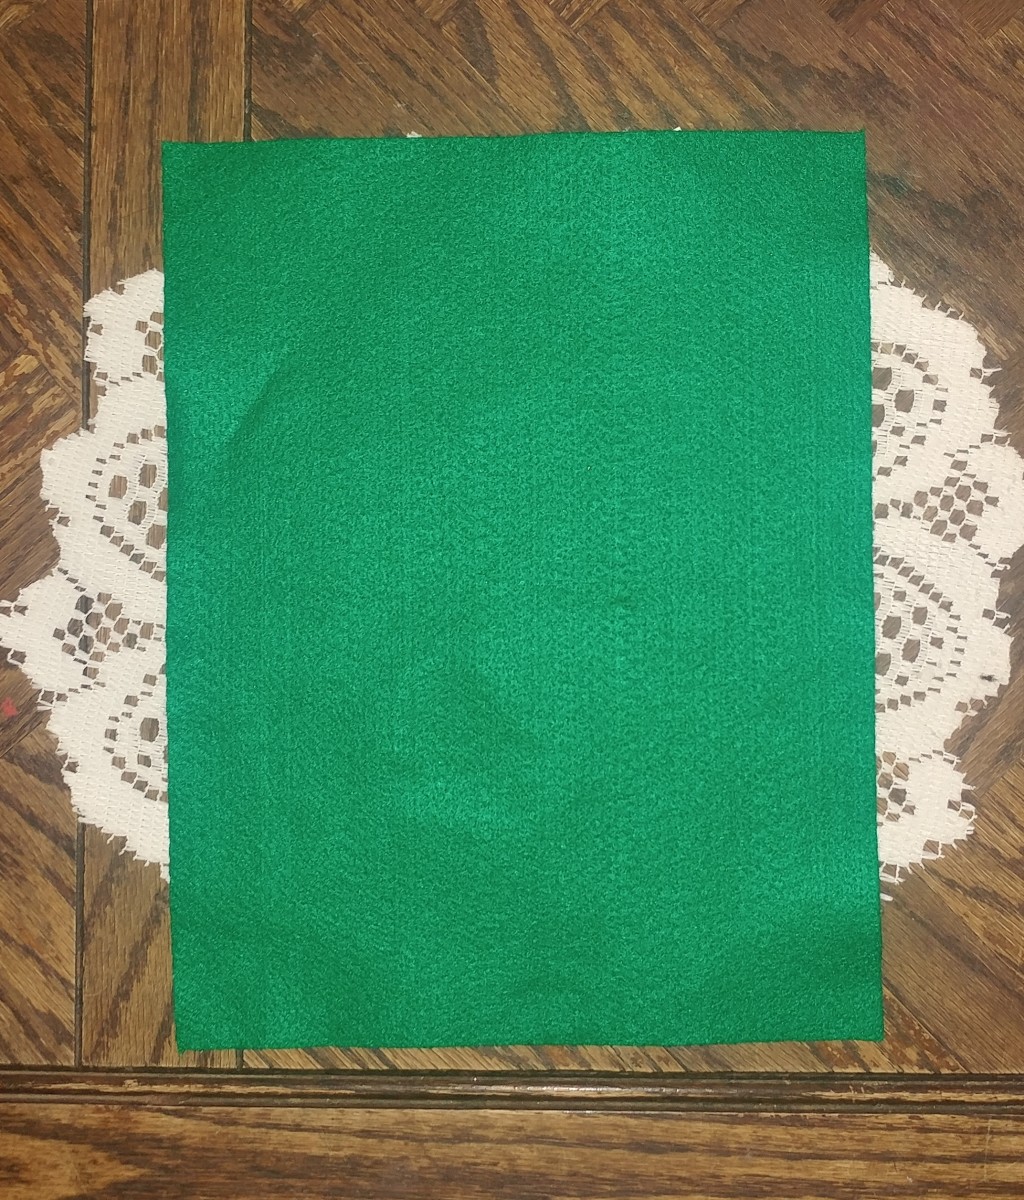 One green felt sheet is perfect for this DIY banner.